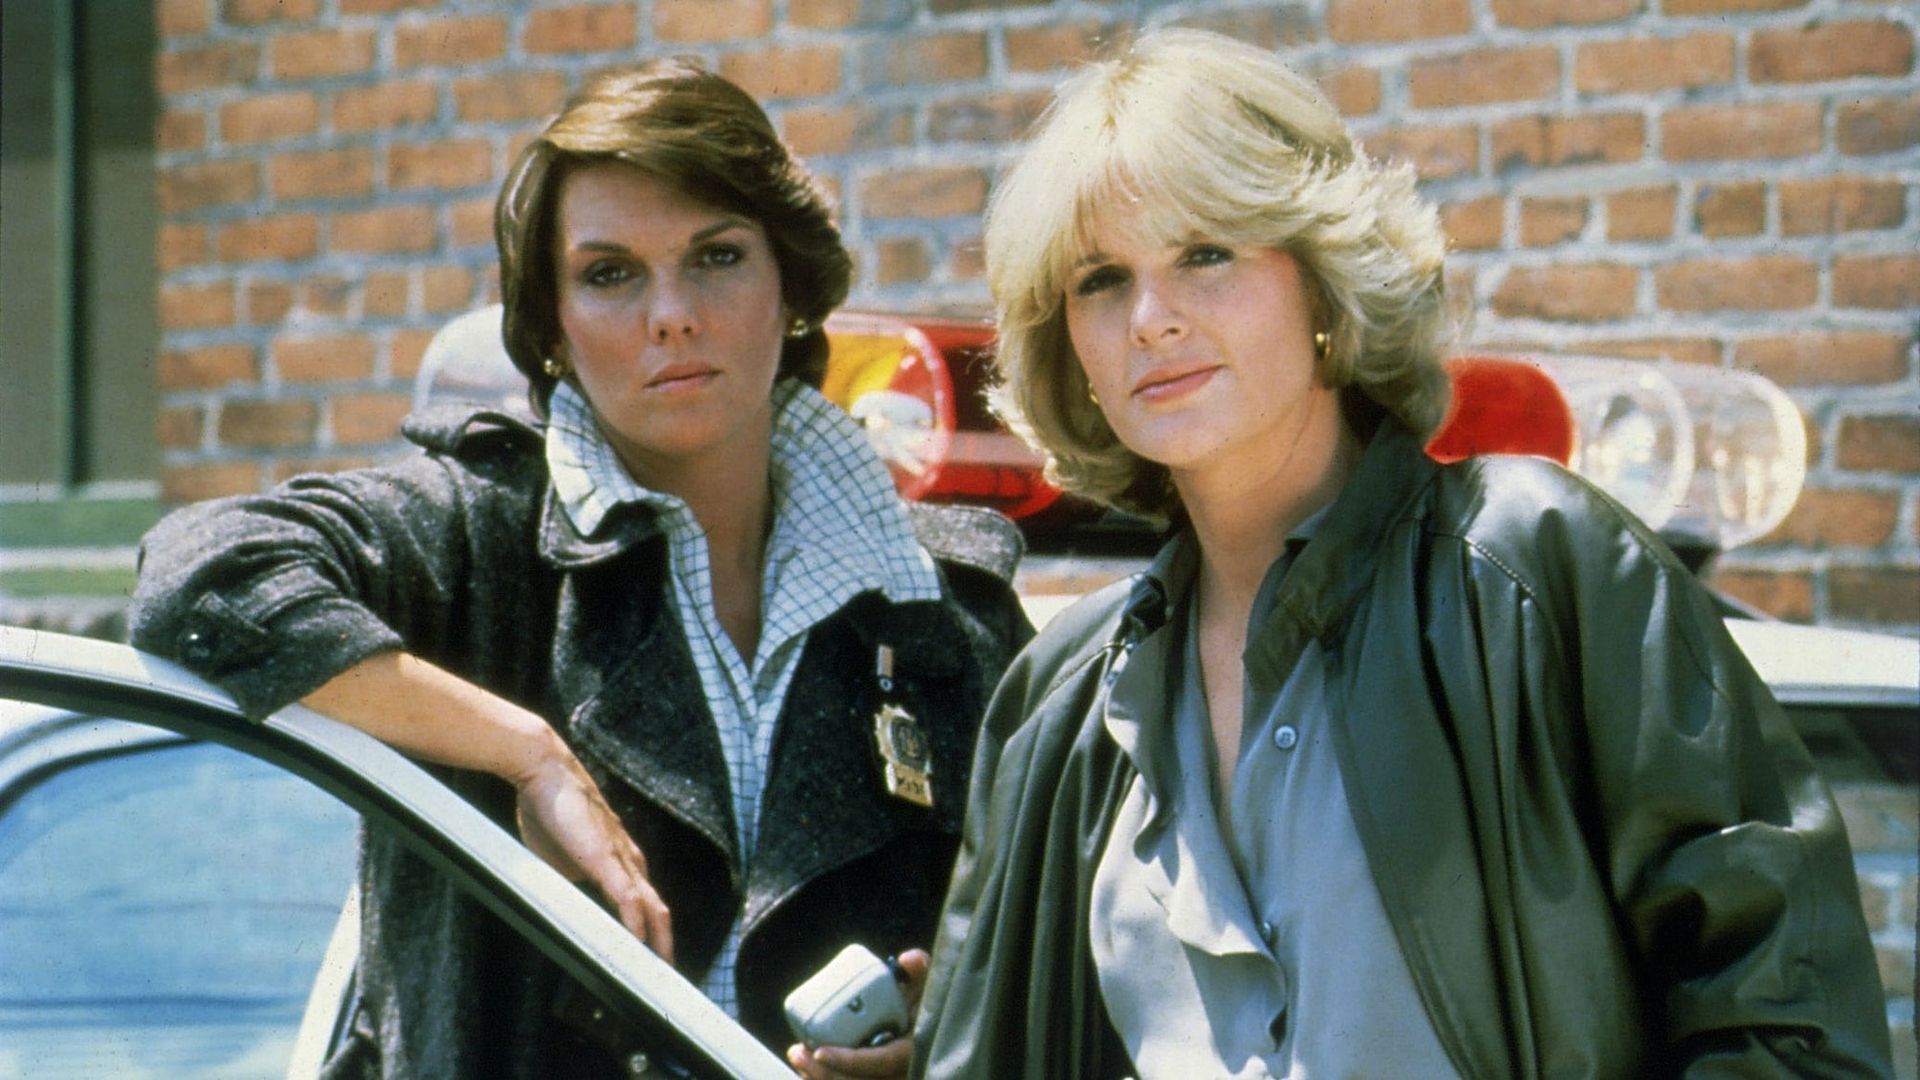 Cagney & Lacey background